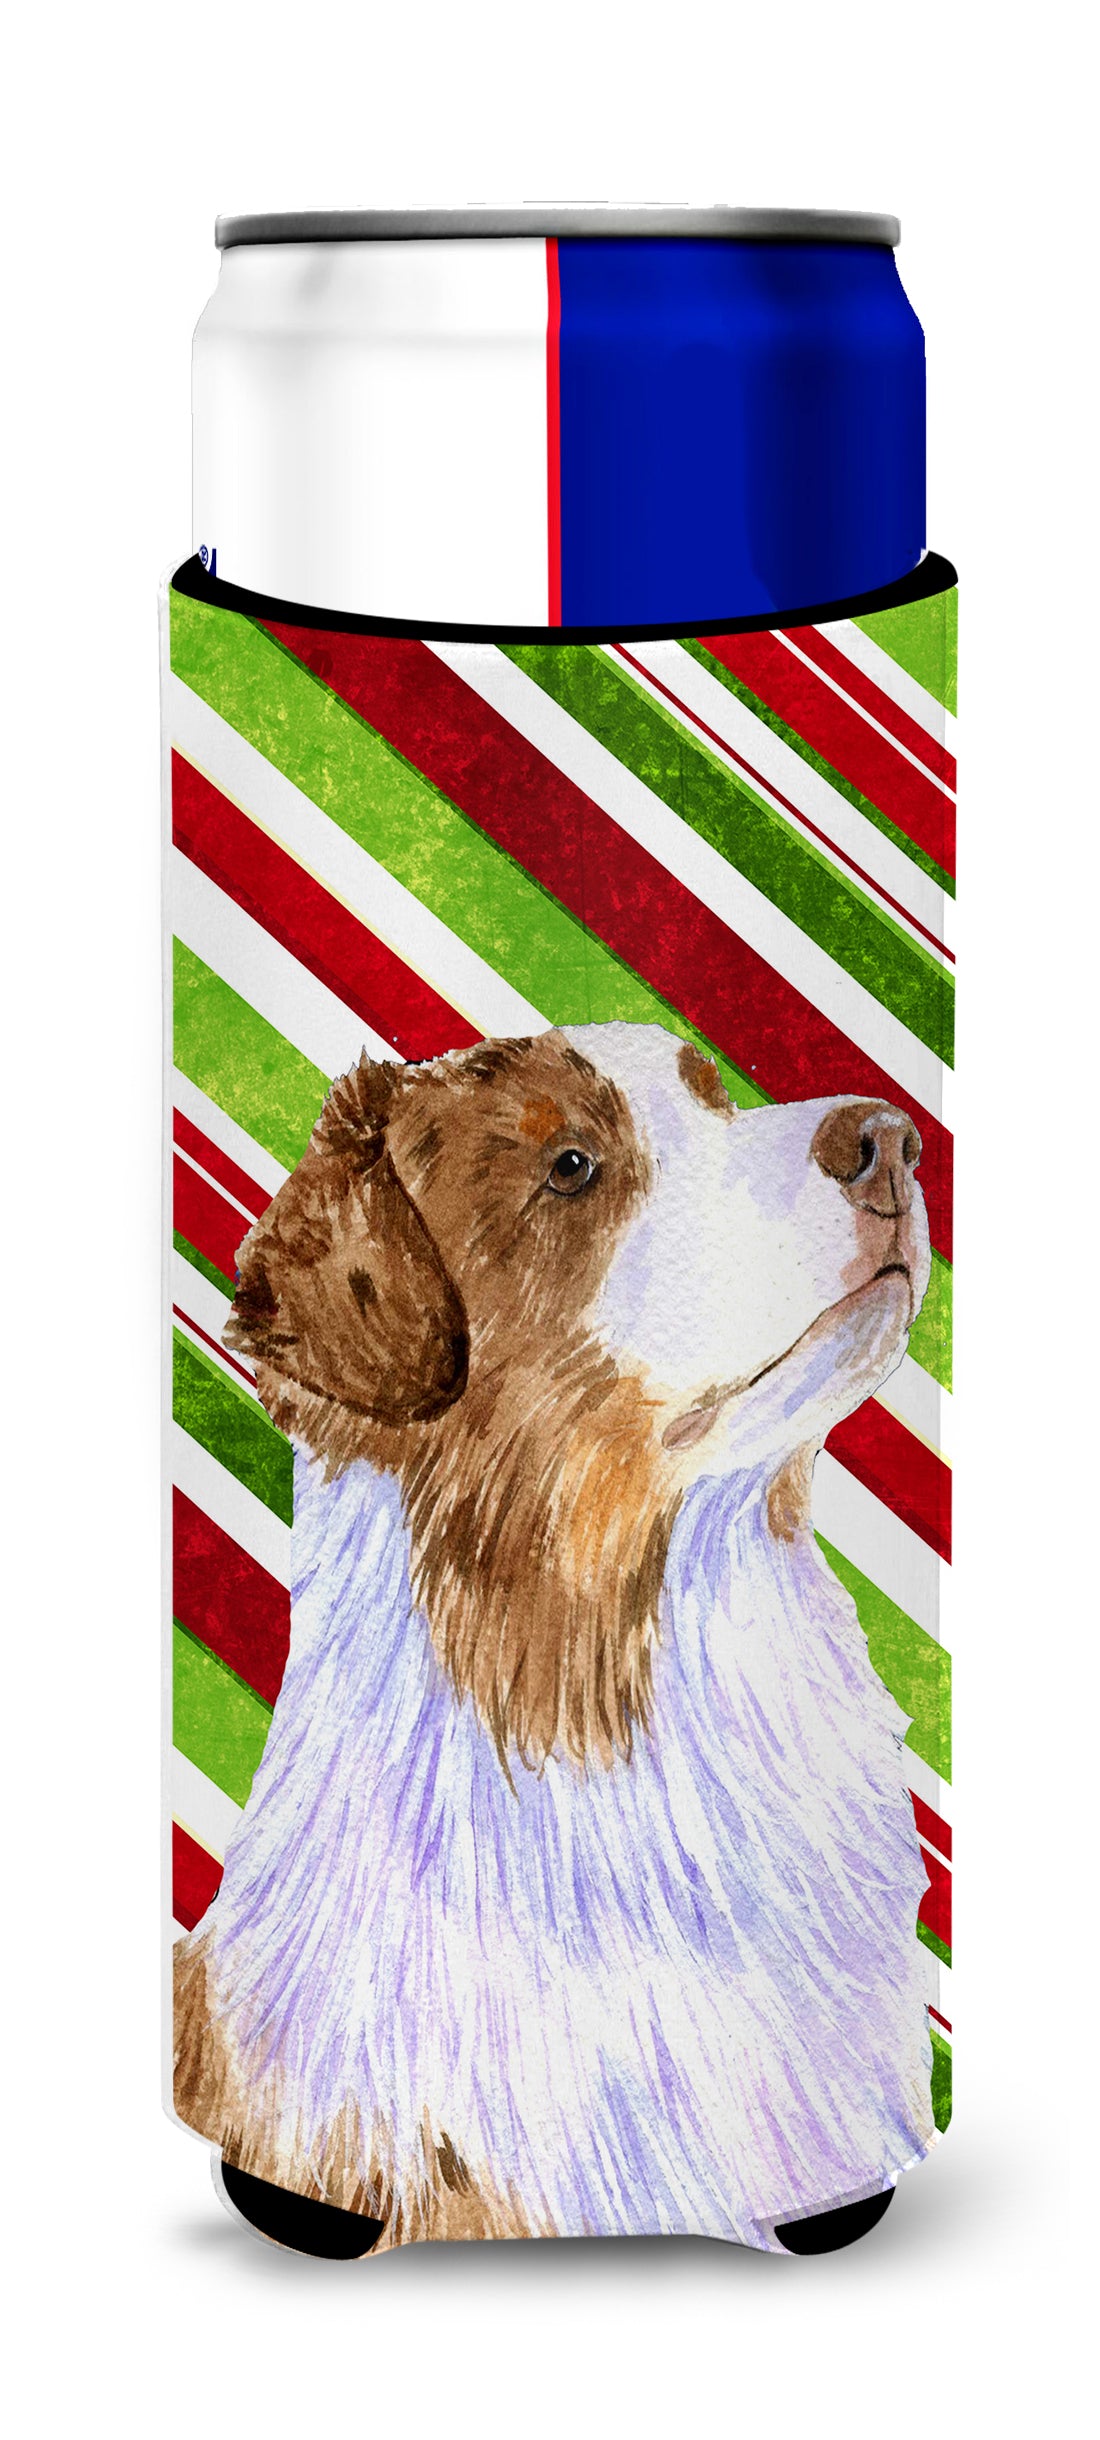 Australian Shepherd Candy Cane Holiday Christmas Ultra Beverage Insulators for slim cans LH9228MUK.